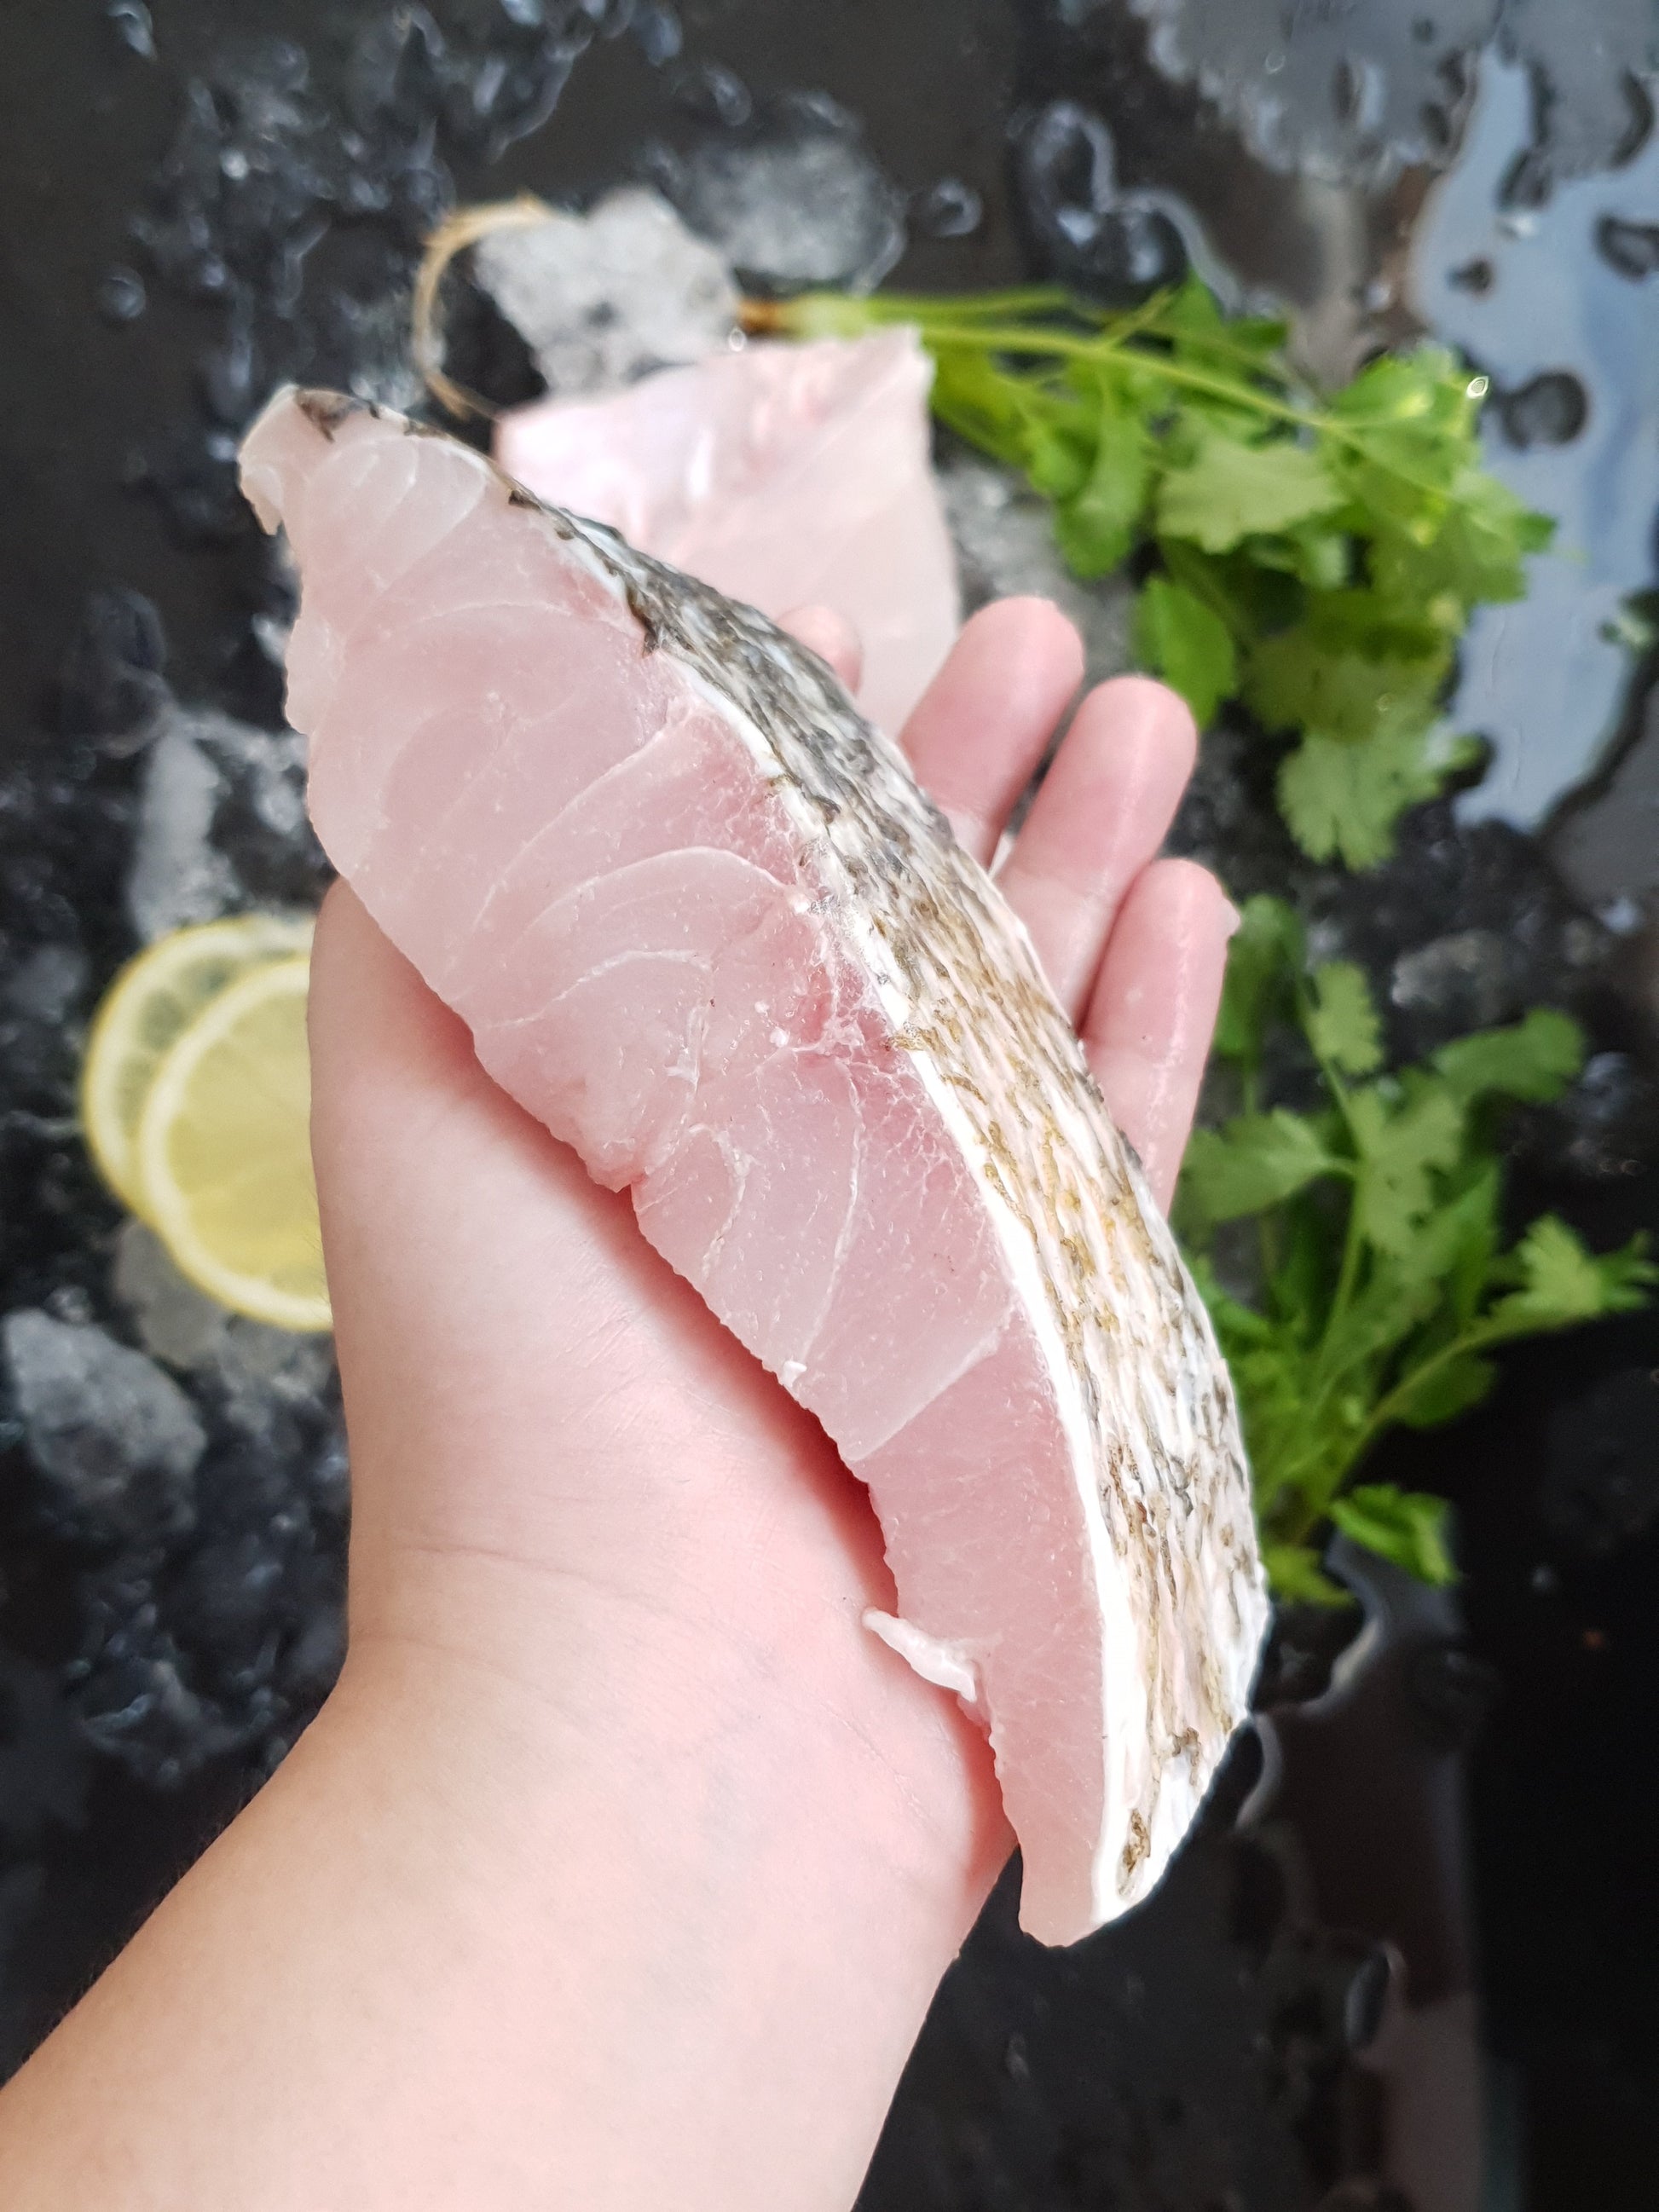 Balai Threadfin 午鱼 Fillet (250-300G) - Catch Of The Day Singapore